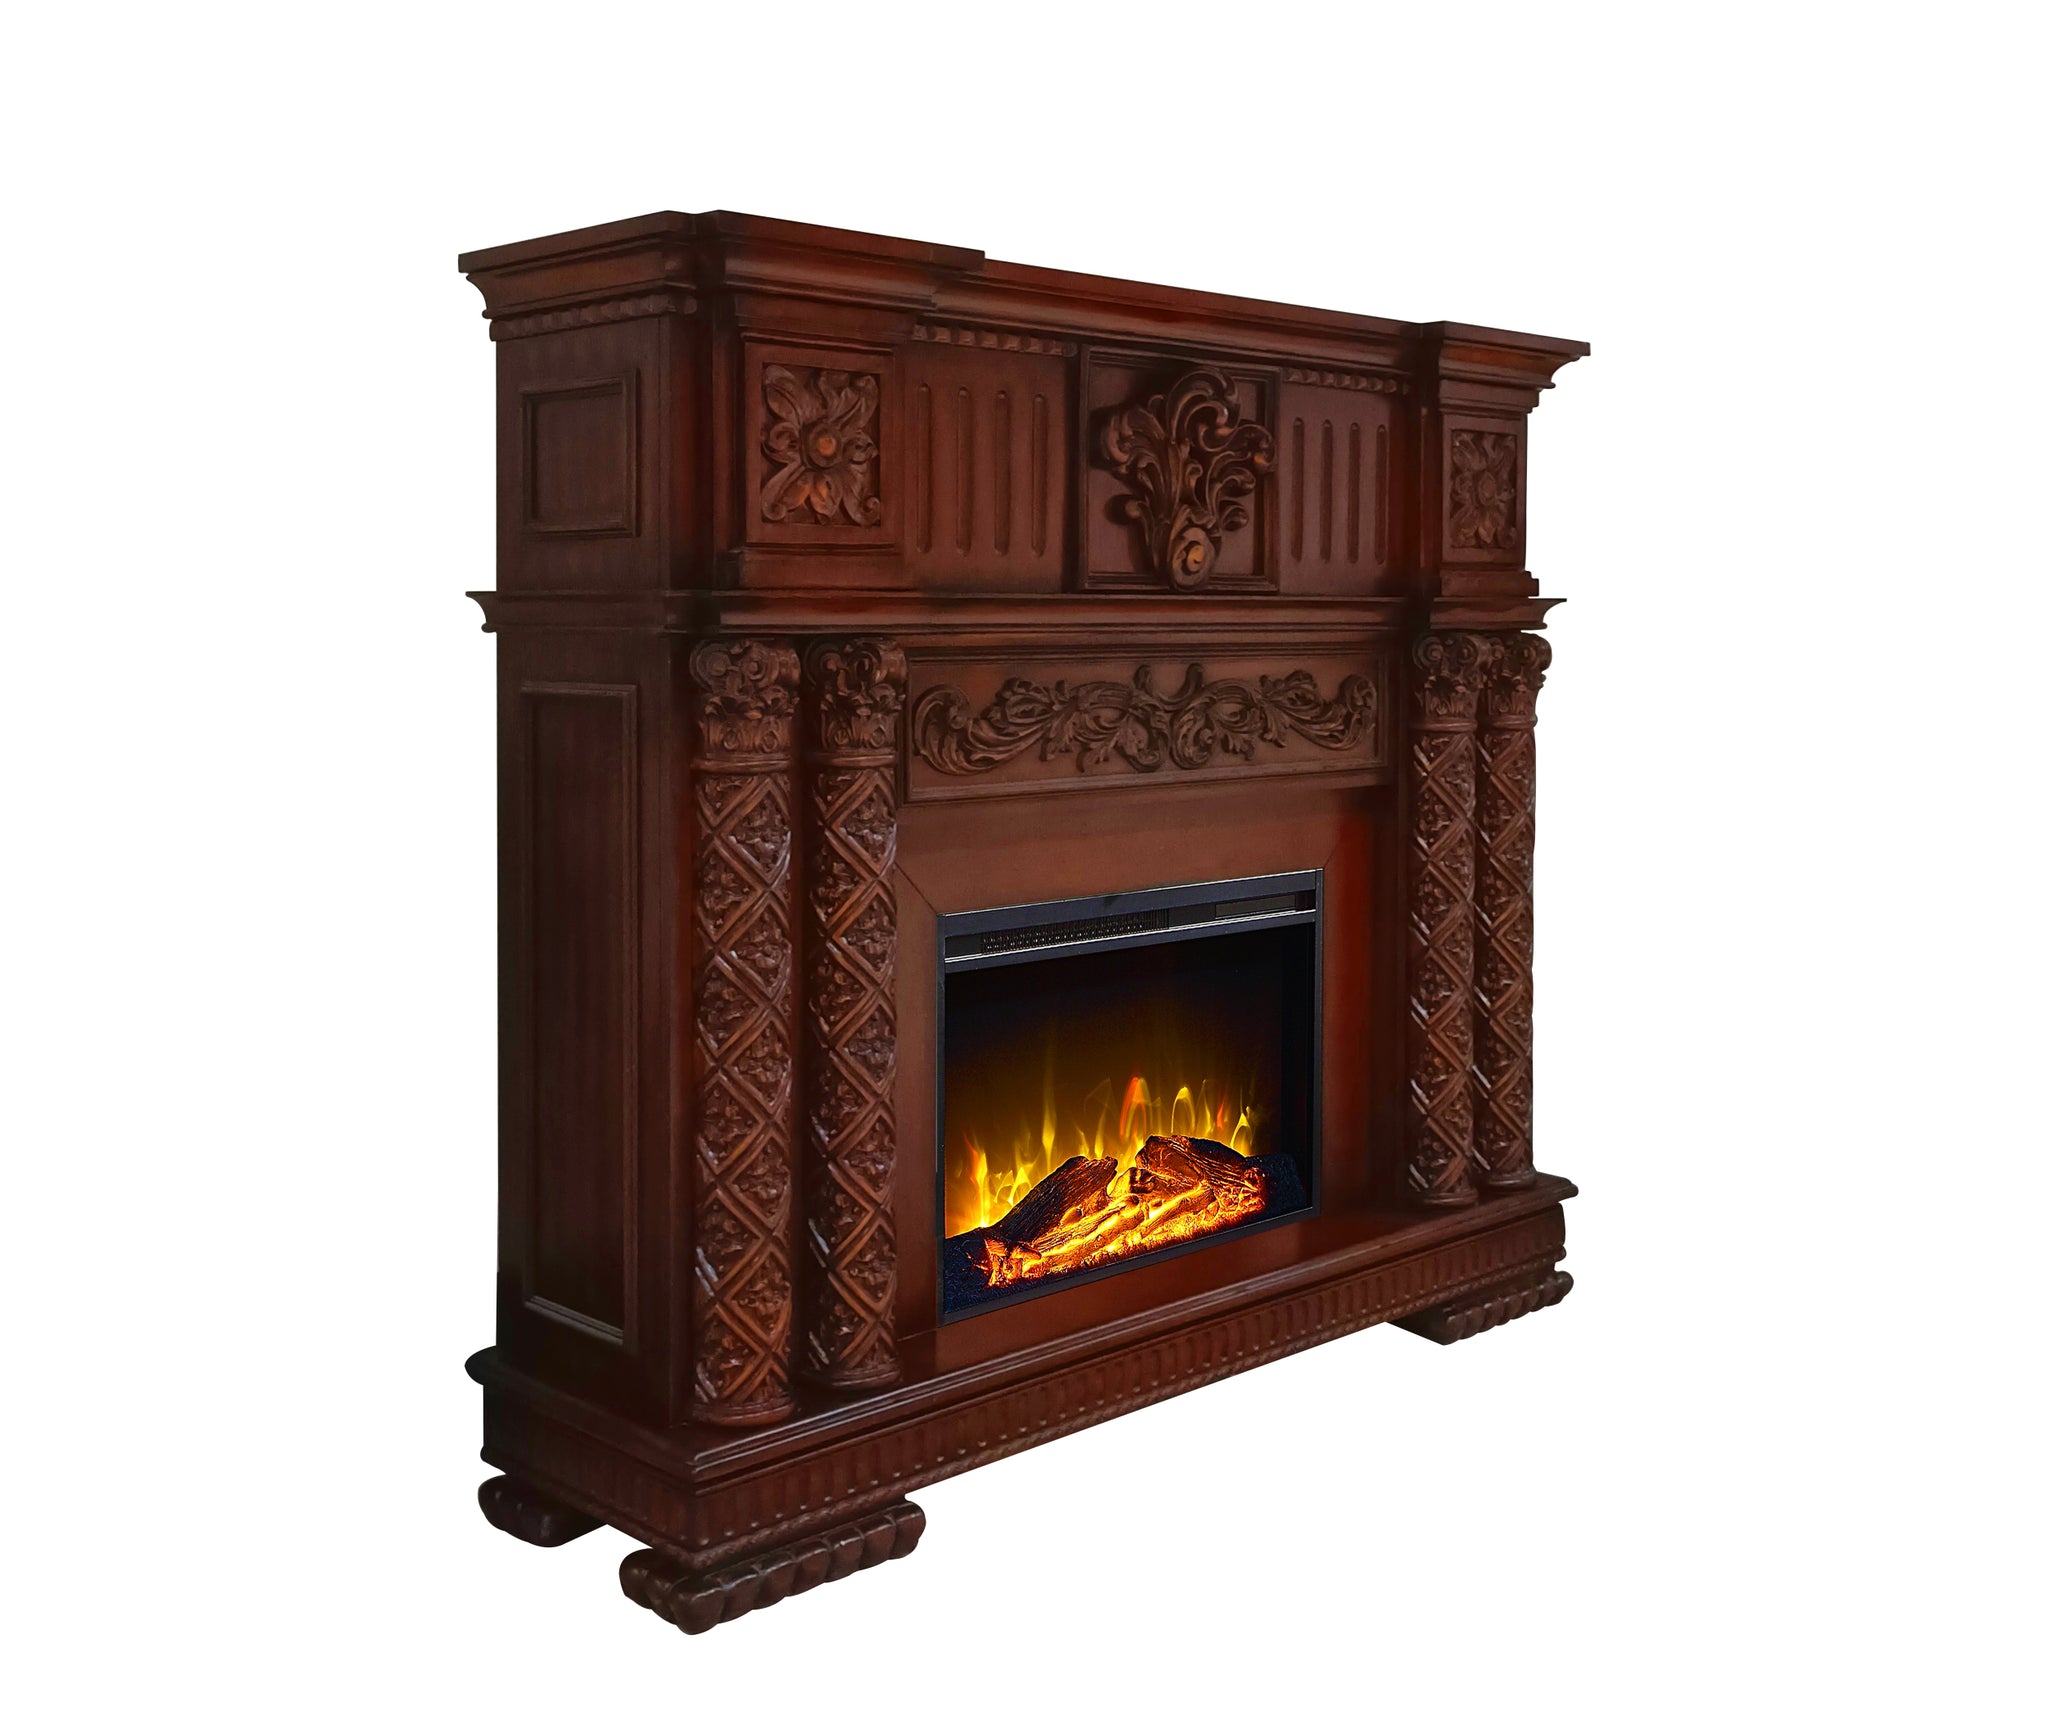 ACME Vendome FIREPLACE Cherry Finish AC01312 cherry-solid wood+mdf